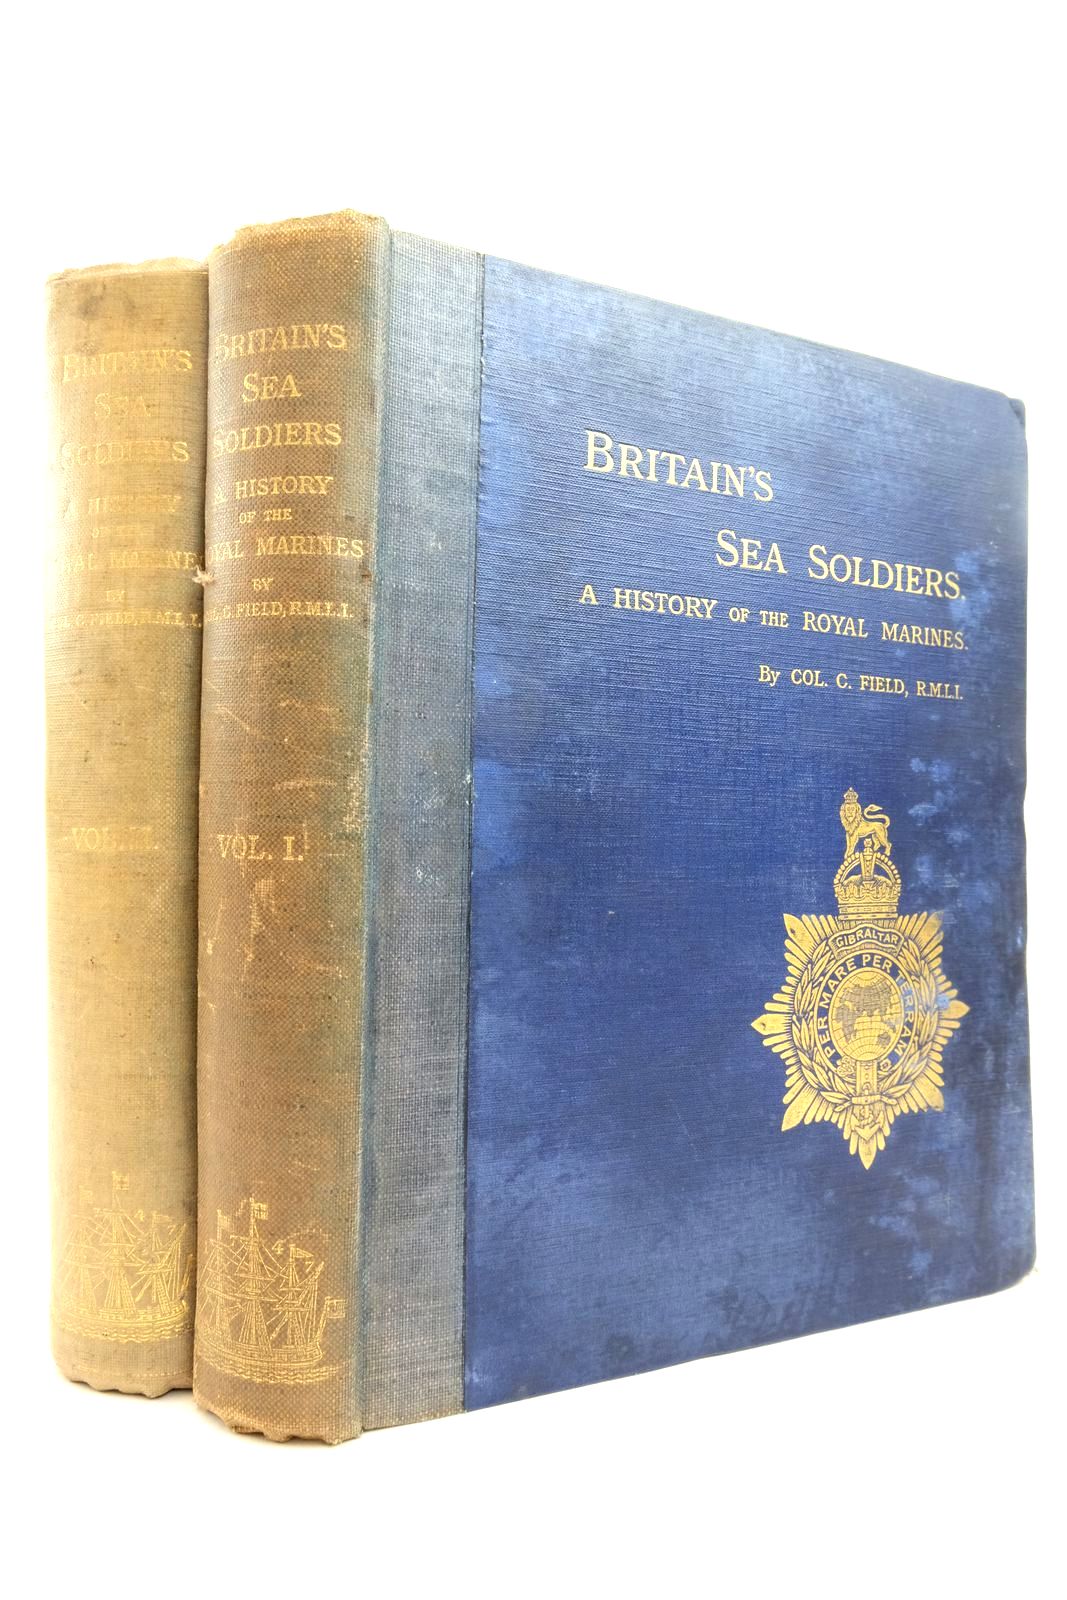 Photo of BRITAIN'S SEA-SOLDIERS (2 VOLUMES) written by Field, Cyril published by Lyceum Press (STOCK CODE: 2137721)  for sale by Stella & Rose's Books